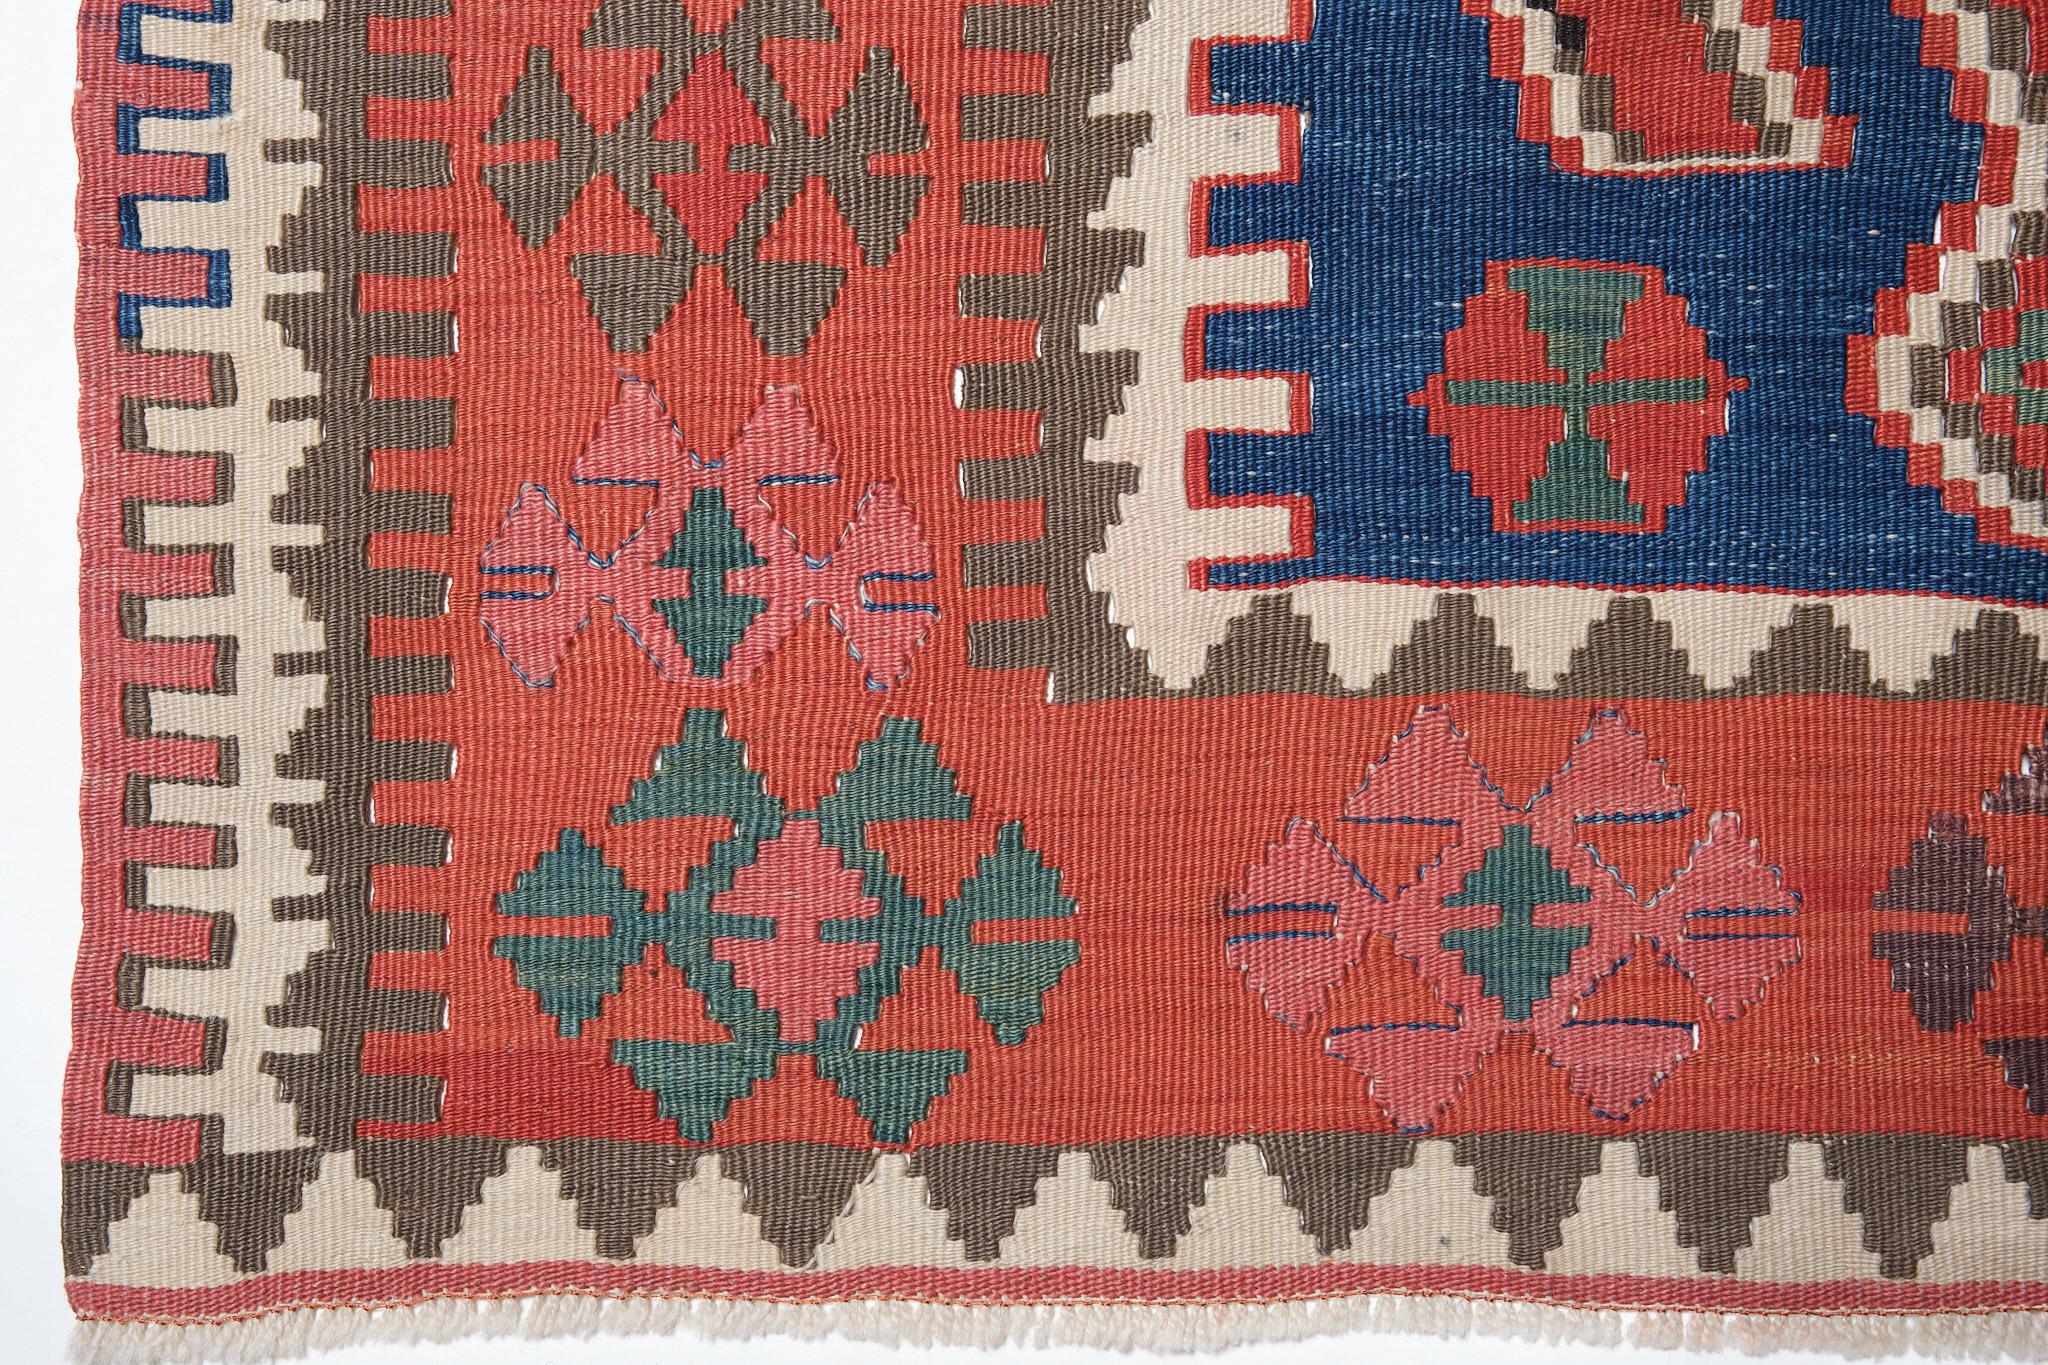 This is Central Anatolian antique Kilim from the Konya - Hotamis region with a rare and beautiful color composition.

It belongs to the scallop from the Konya region of Central Anatolia. This old kilim has a wonderful faded color and texture that is